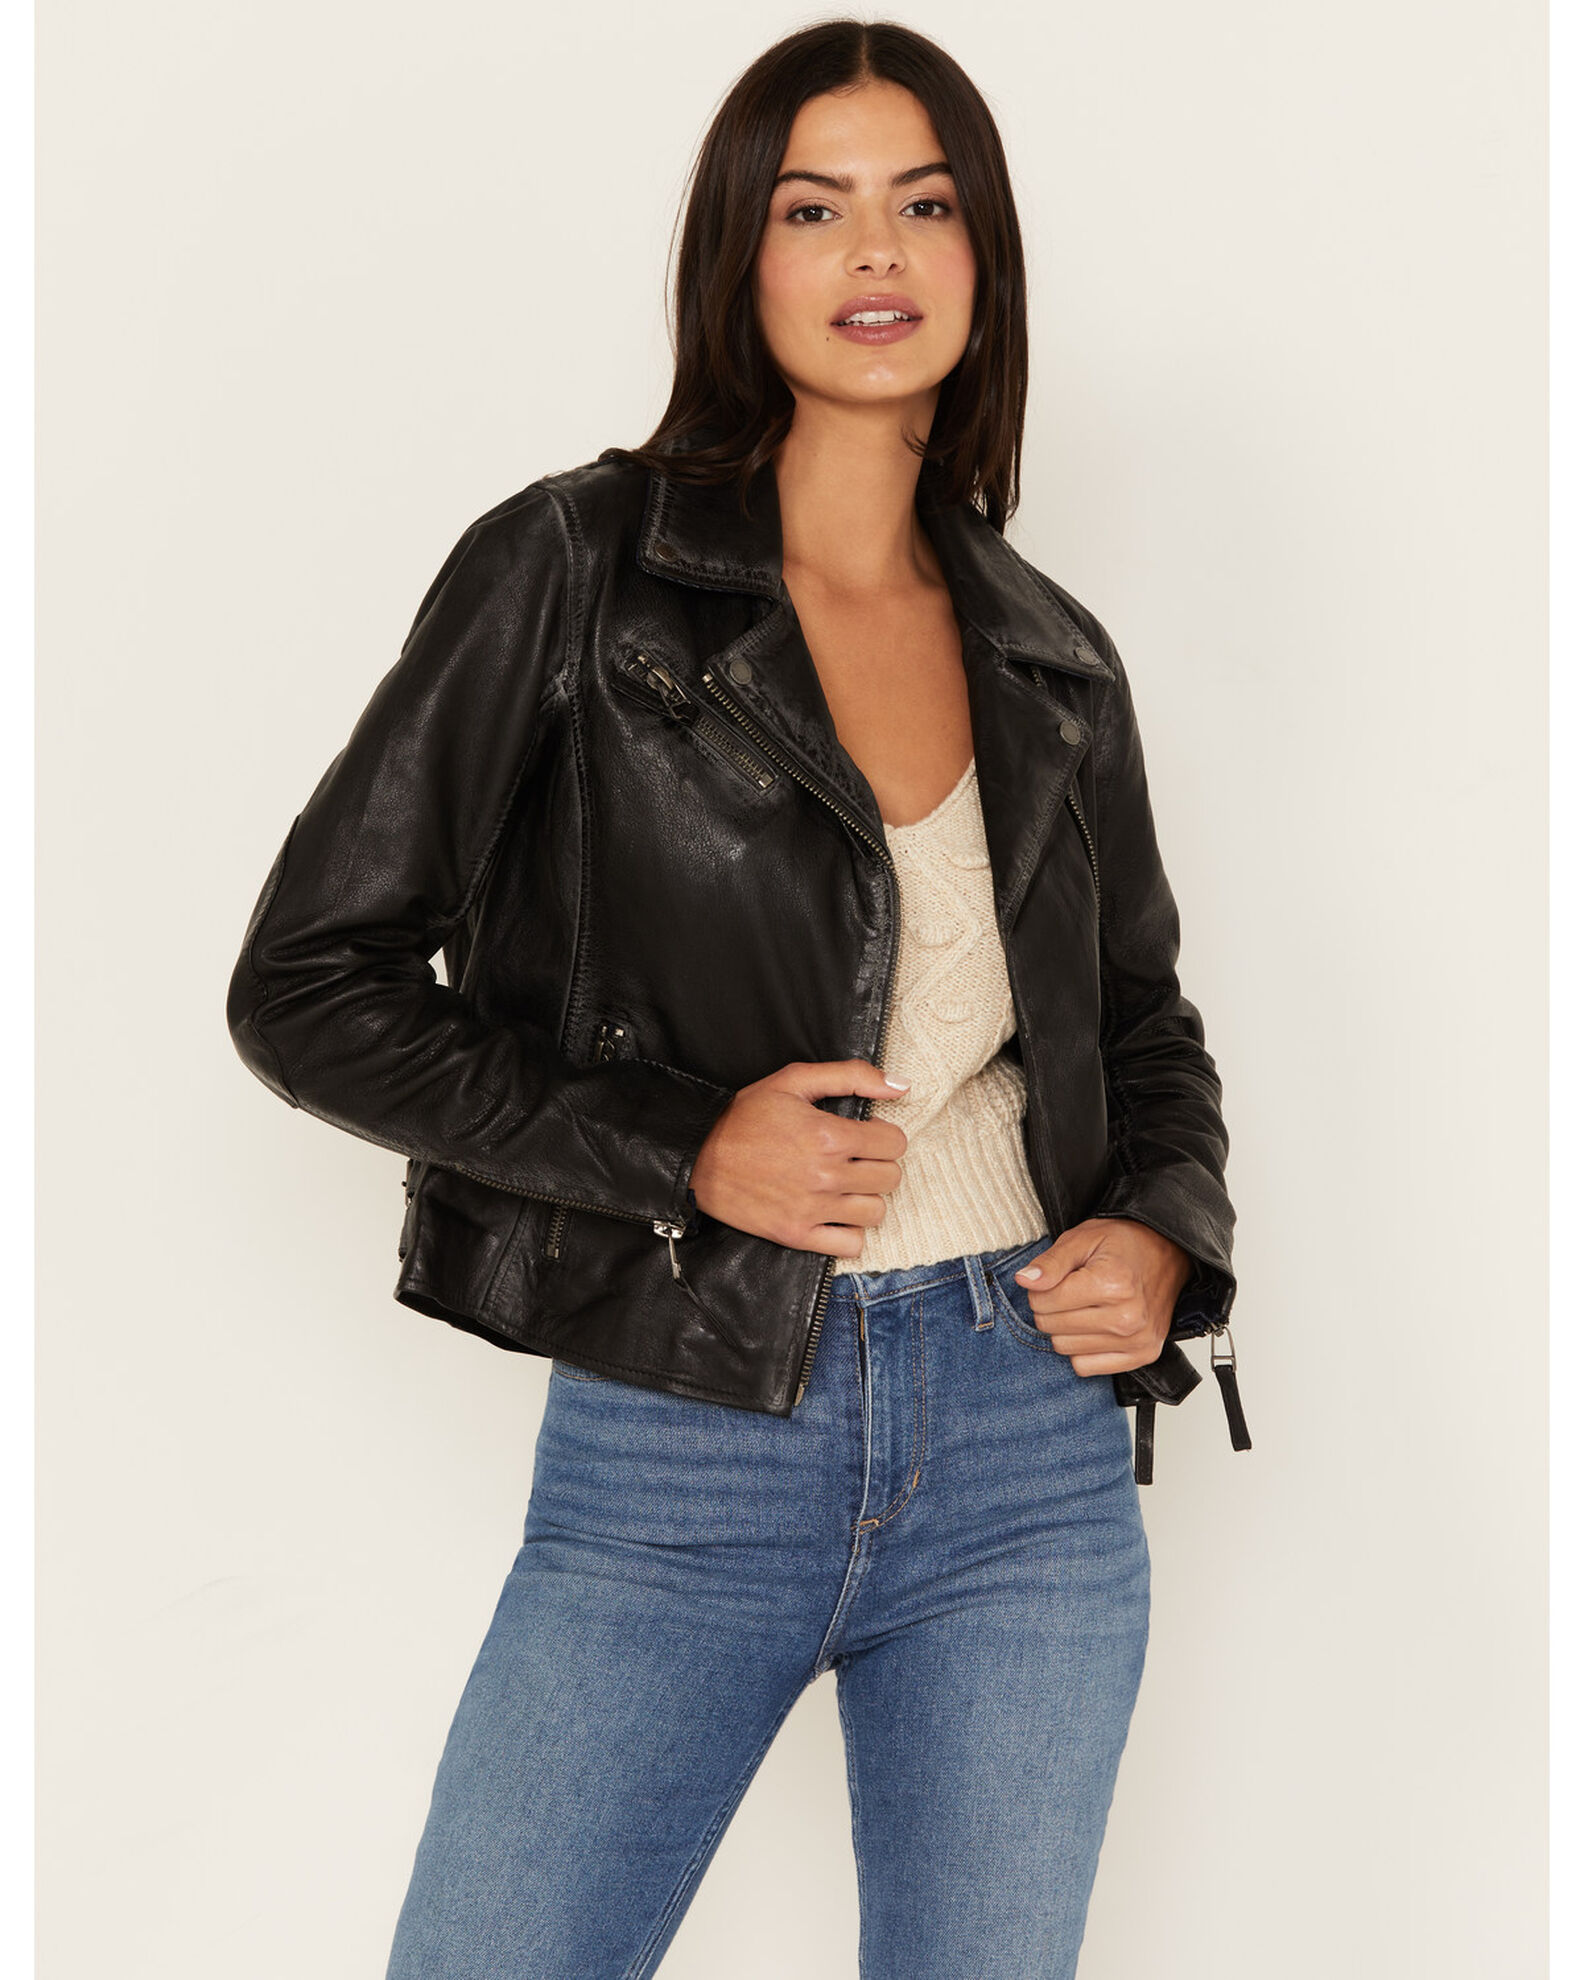 Mauritius Women's Christy Scatter Star Leather Jacket | Boot Barn